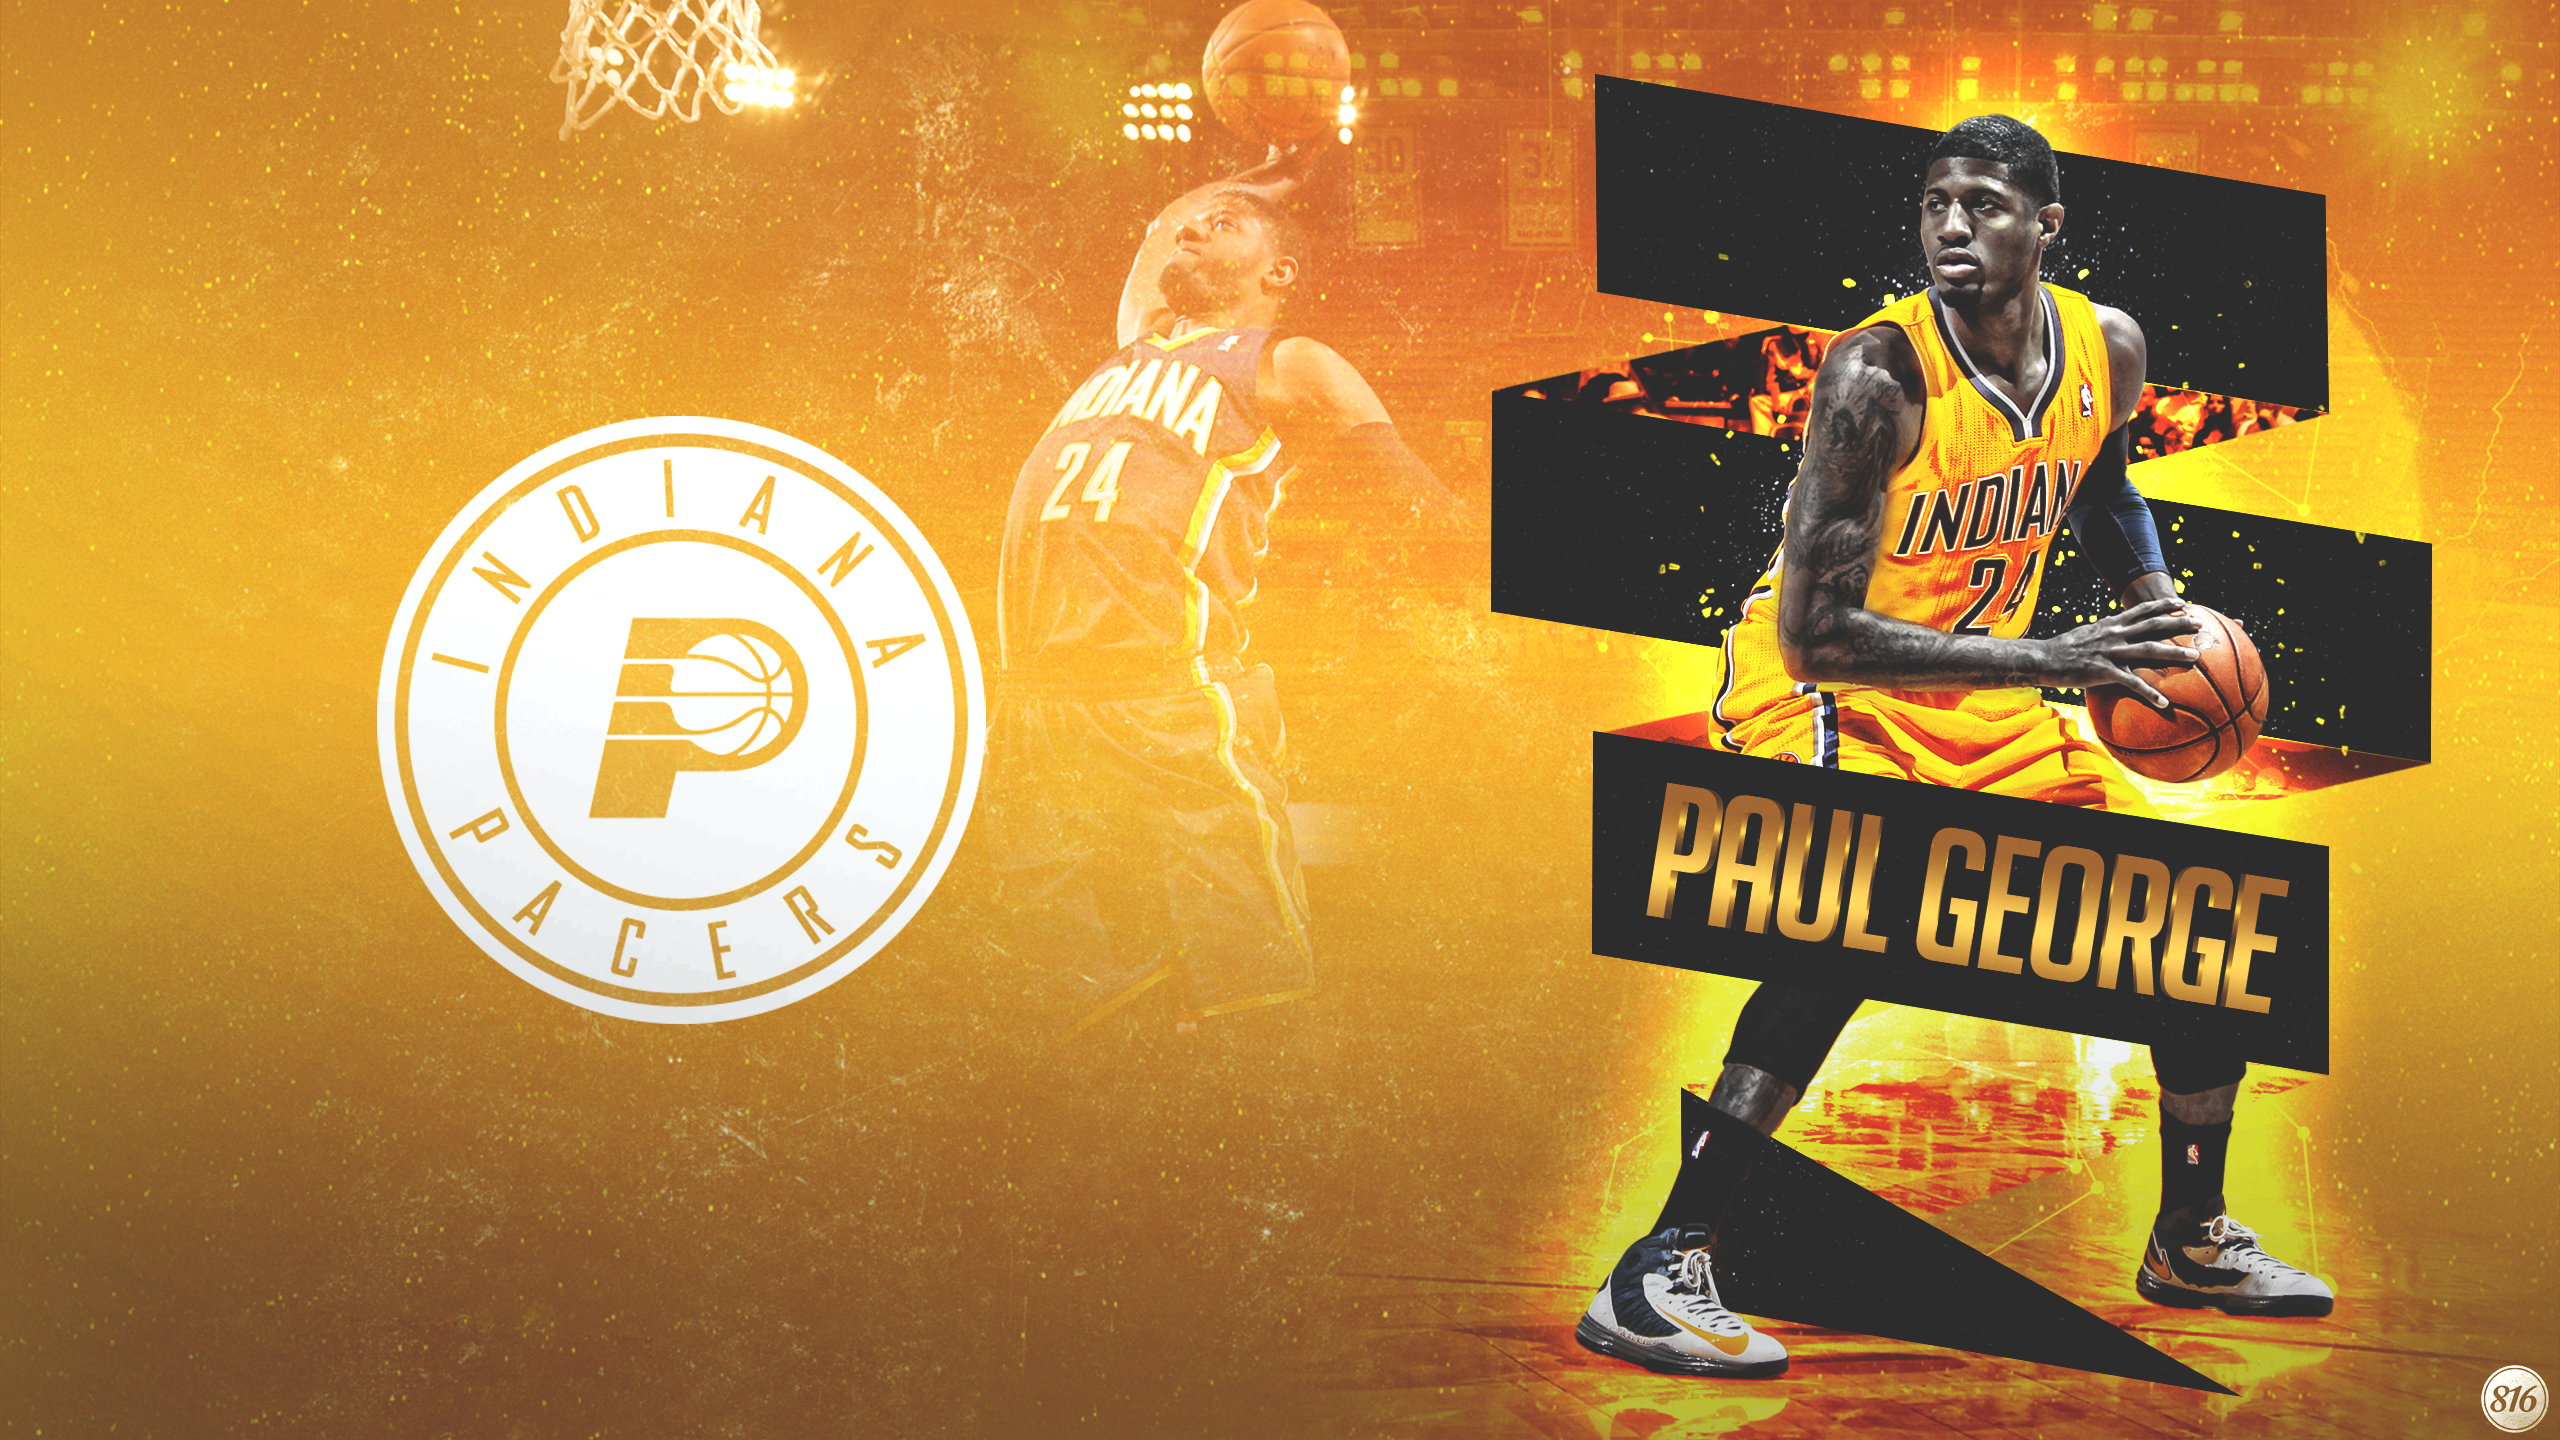 Wallpaper paul george paul george indiana pacers indiana pacers